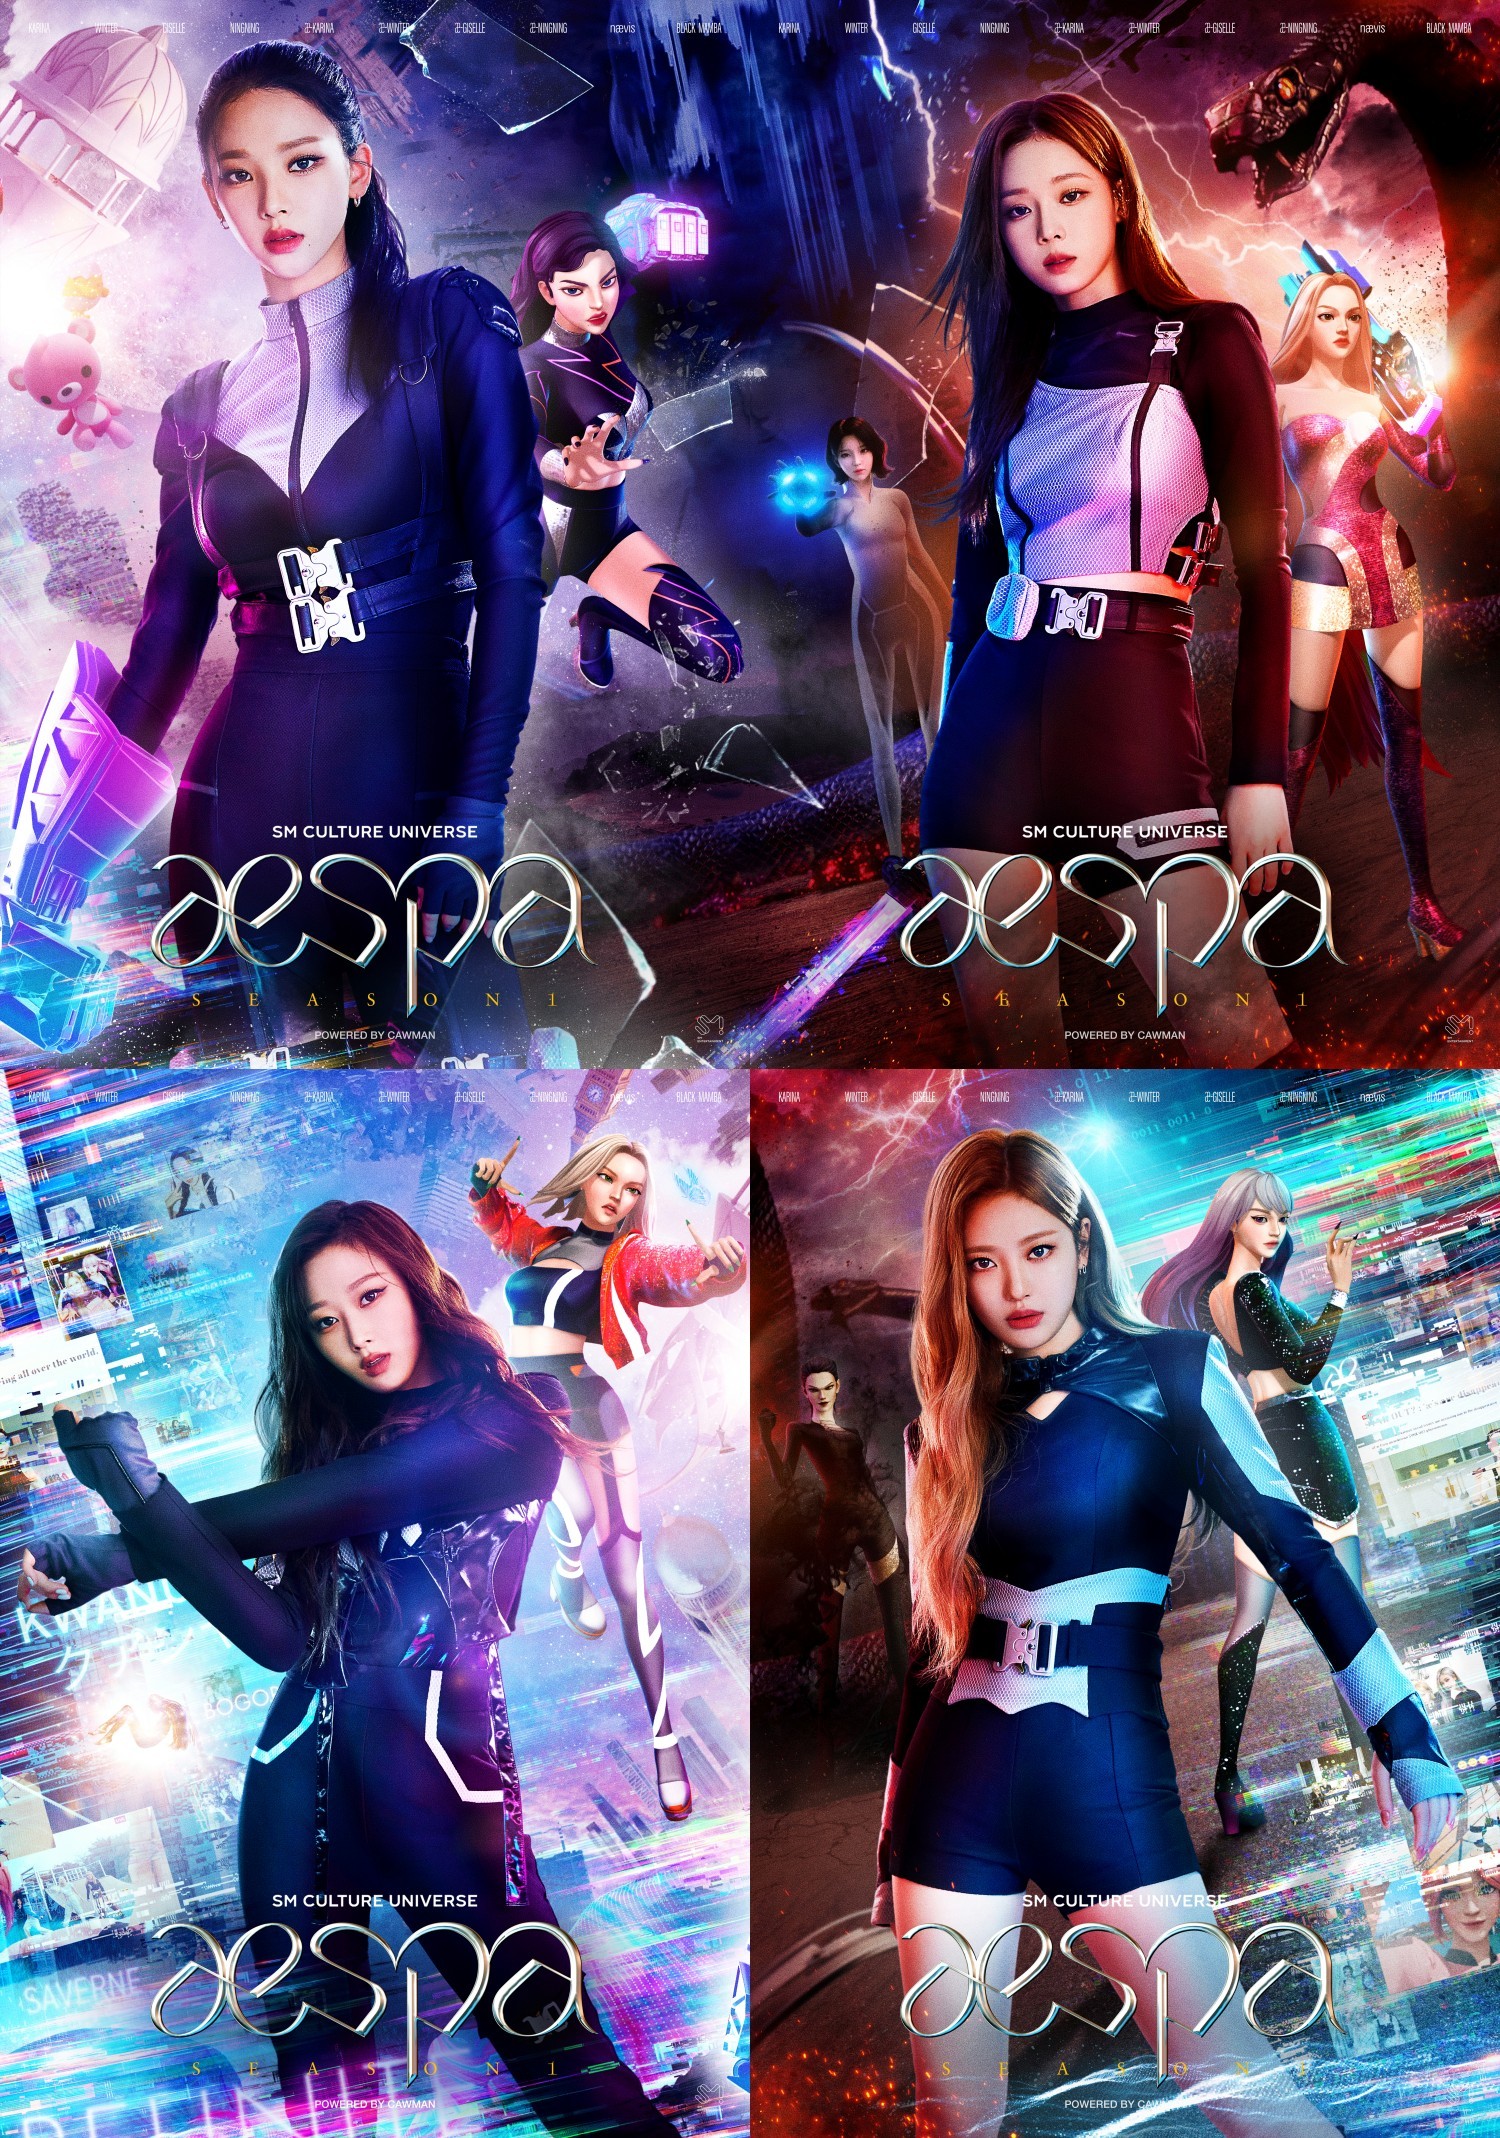 Aespa reveal excitement three days ahead of first-ever concert